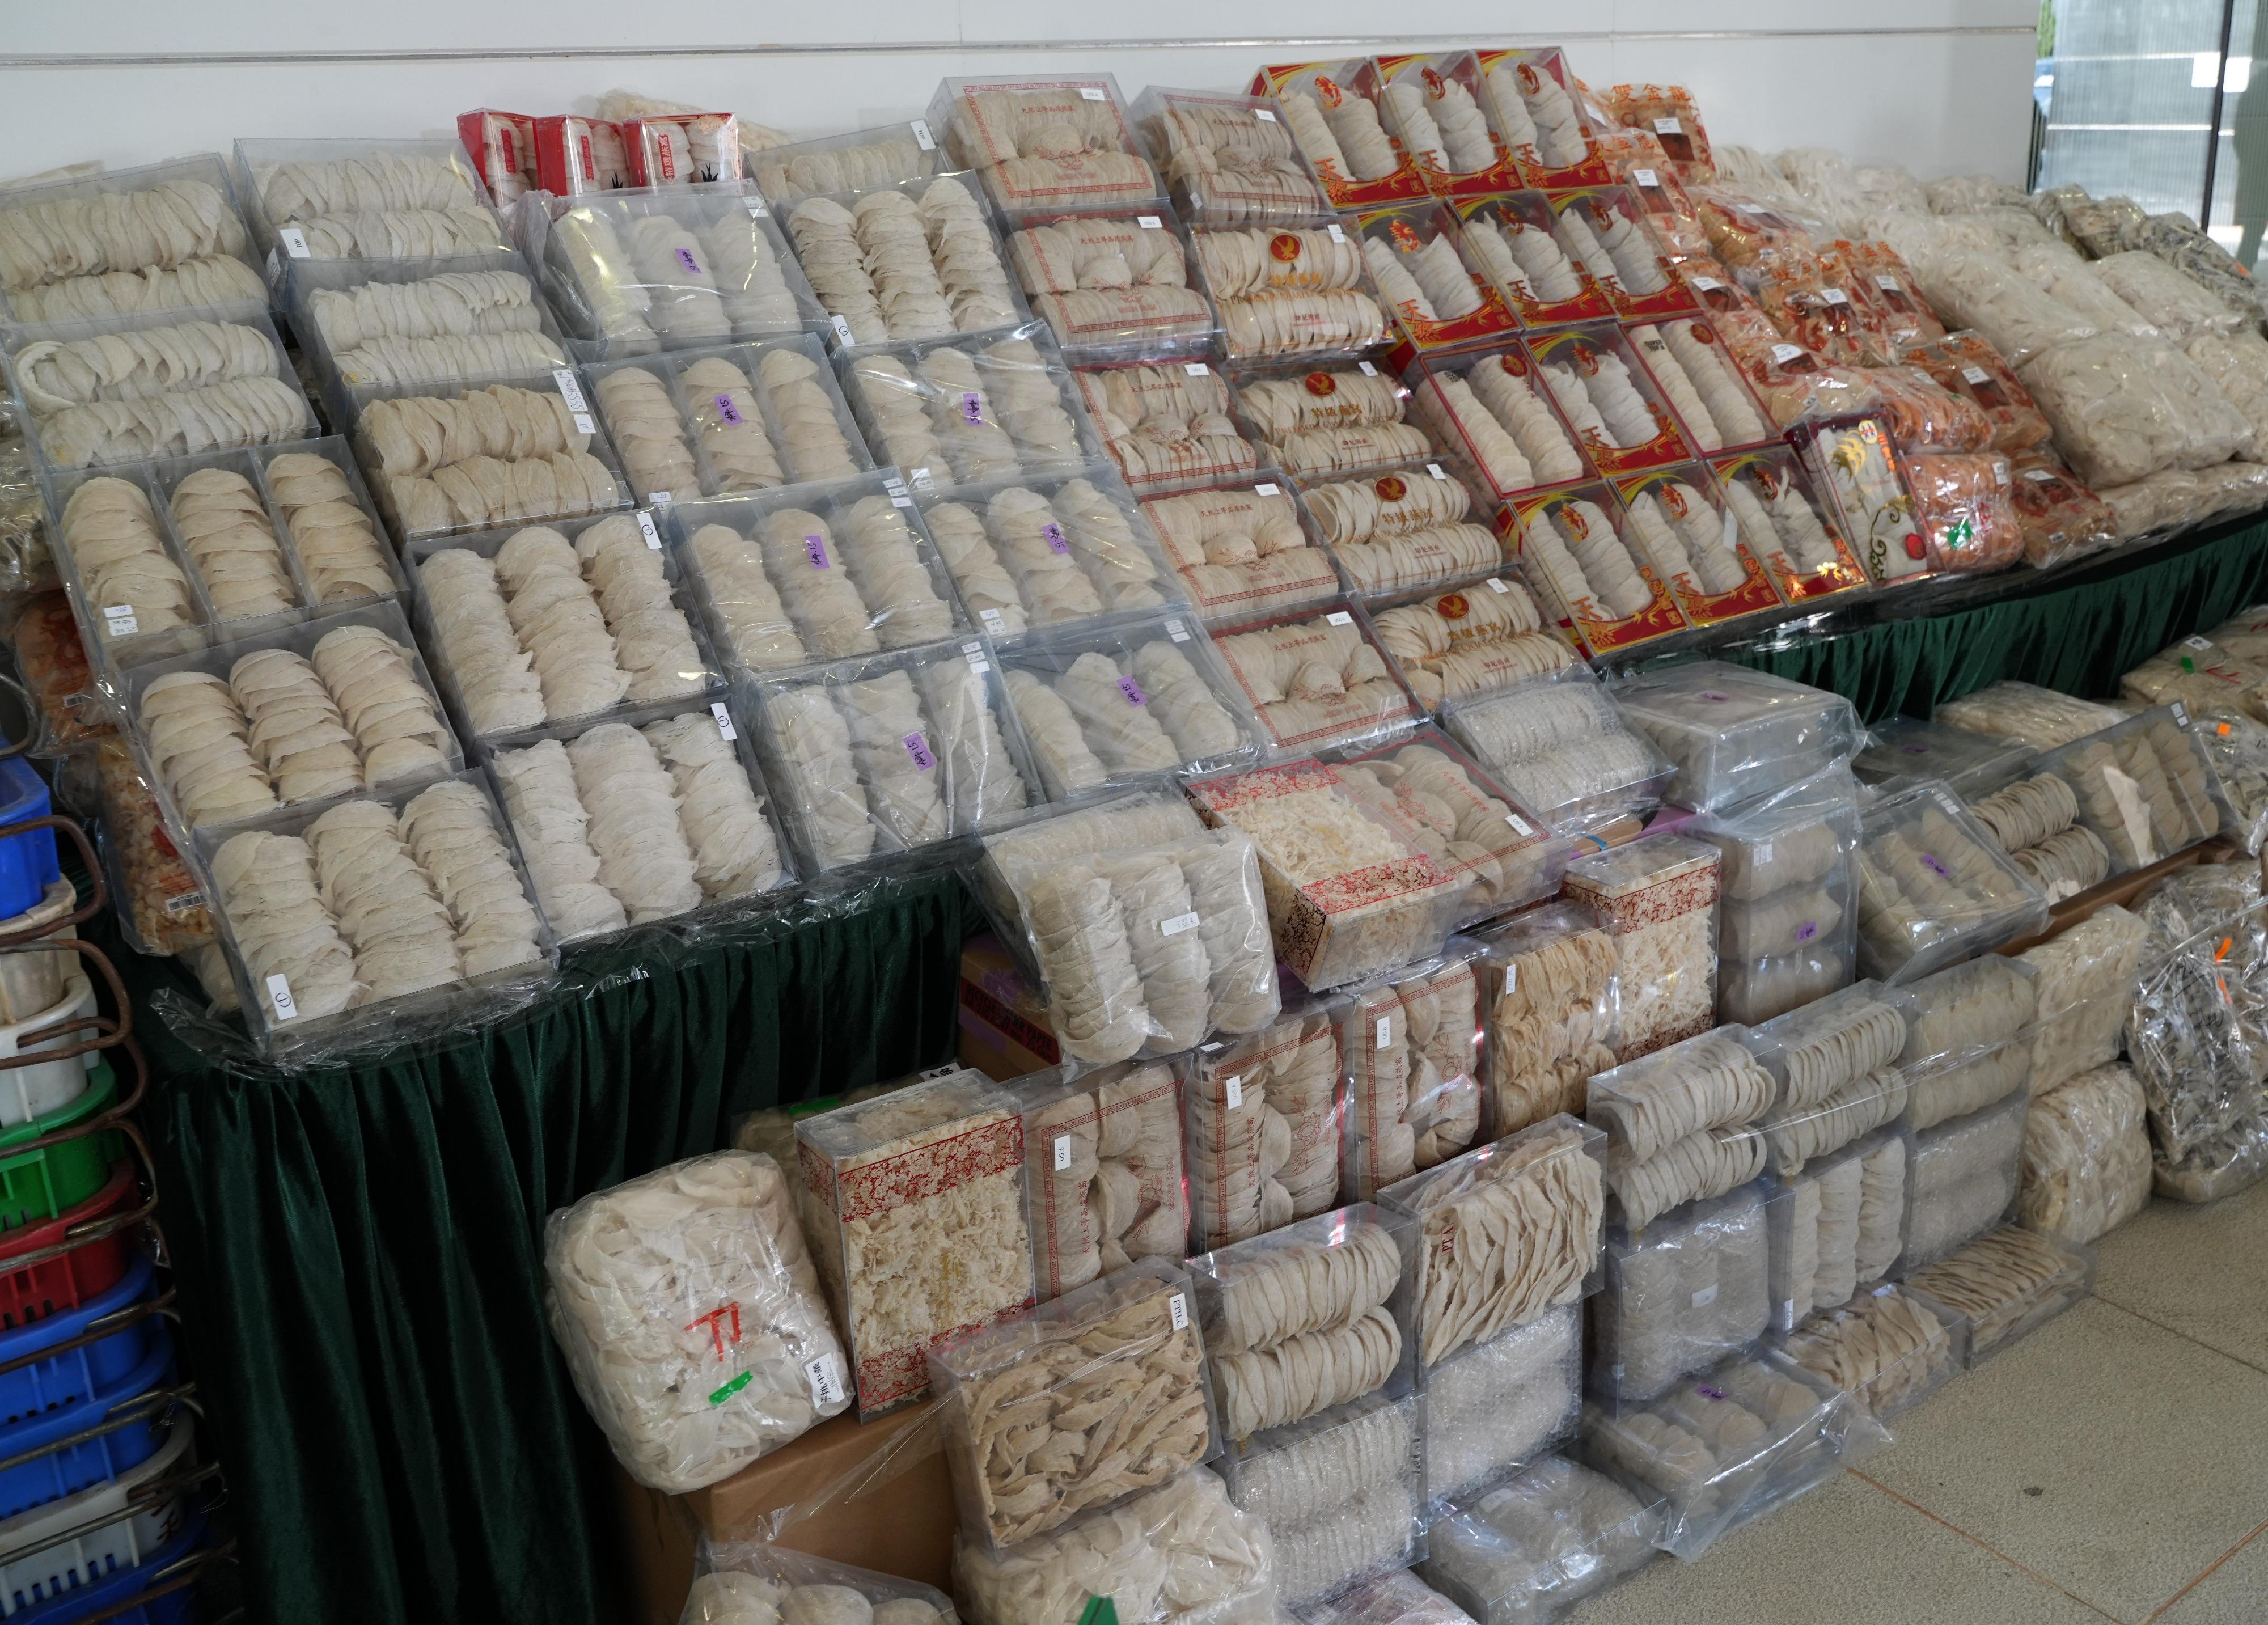 Hong Kong Customs yesterday (January 3) detected a suspected smuggling case involving a cross-boundary goods vehicle at the Man Kam To Control Point and seized about 234 kilograms of suspected smuggled bird's nests with an estimated market value of about $9.5 million. Photo shows some of the suspected smuggled bird's nests seized.